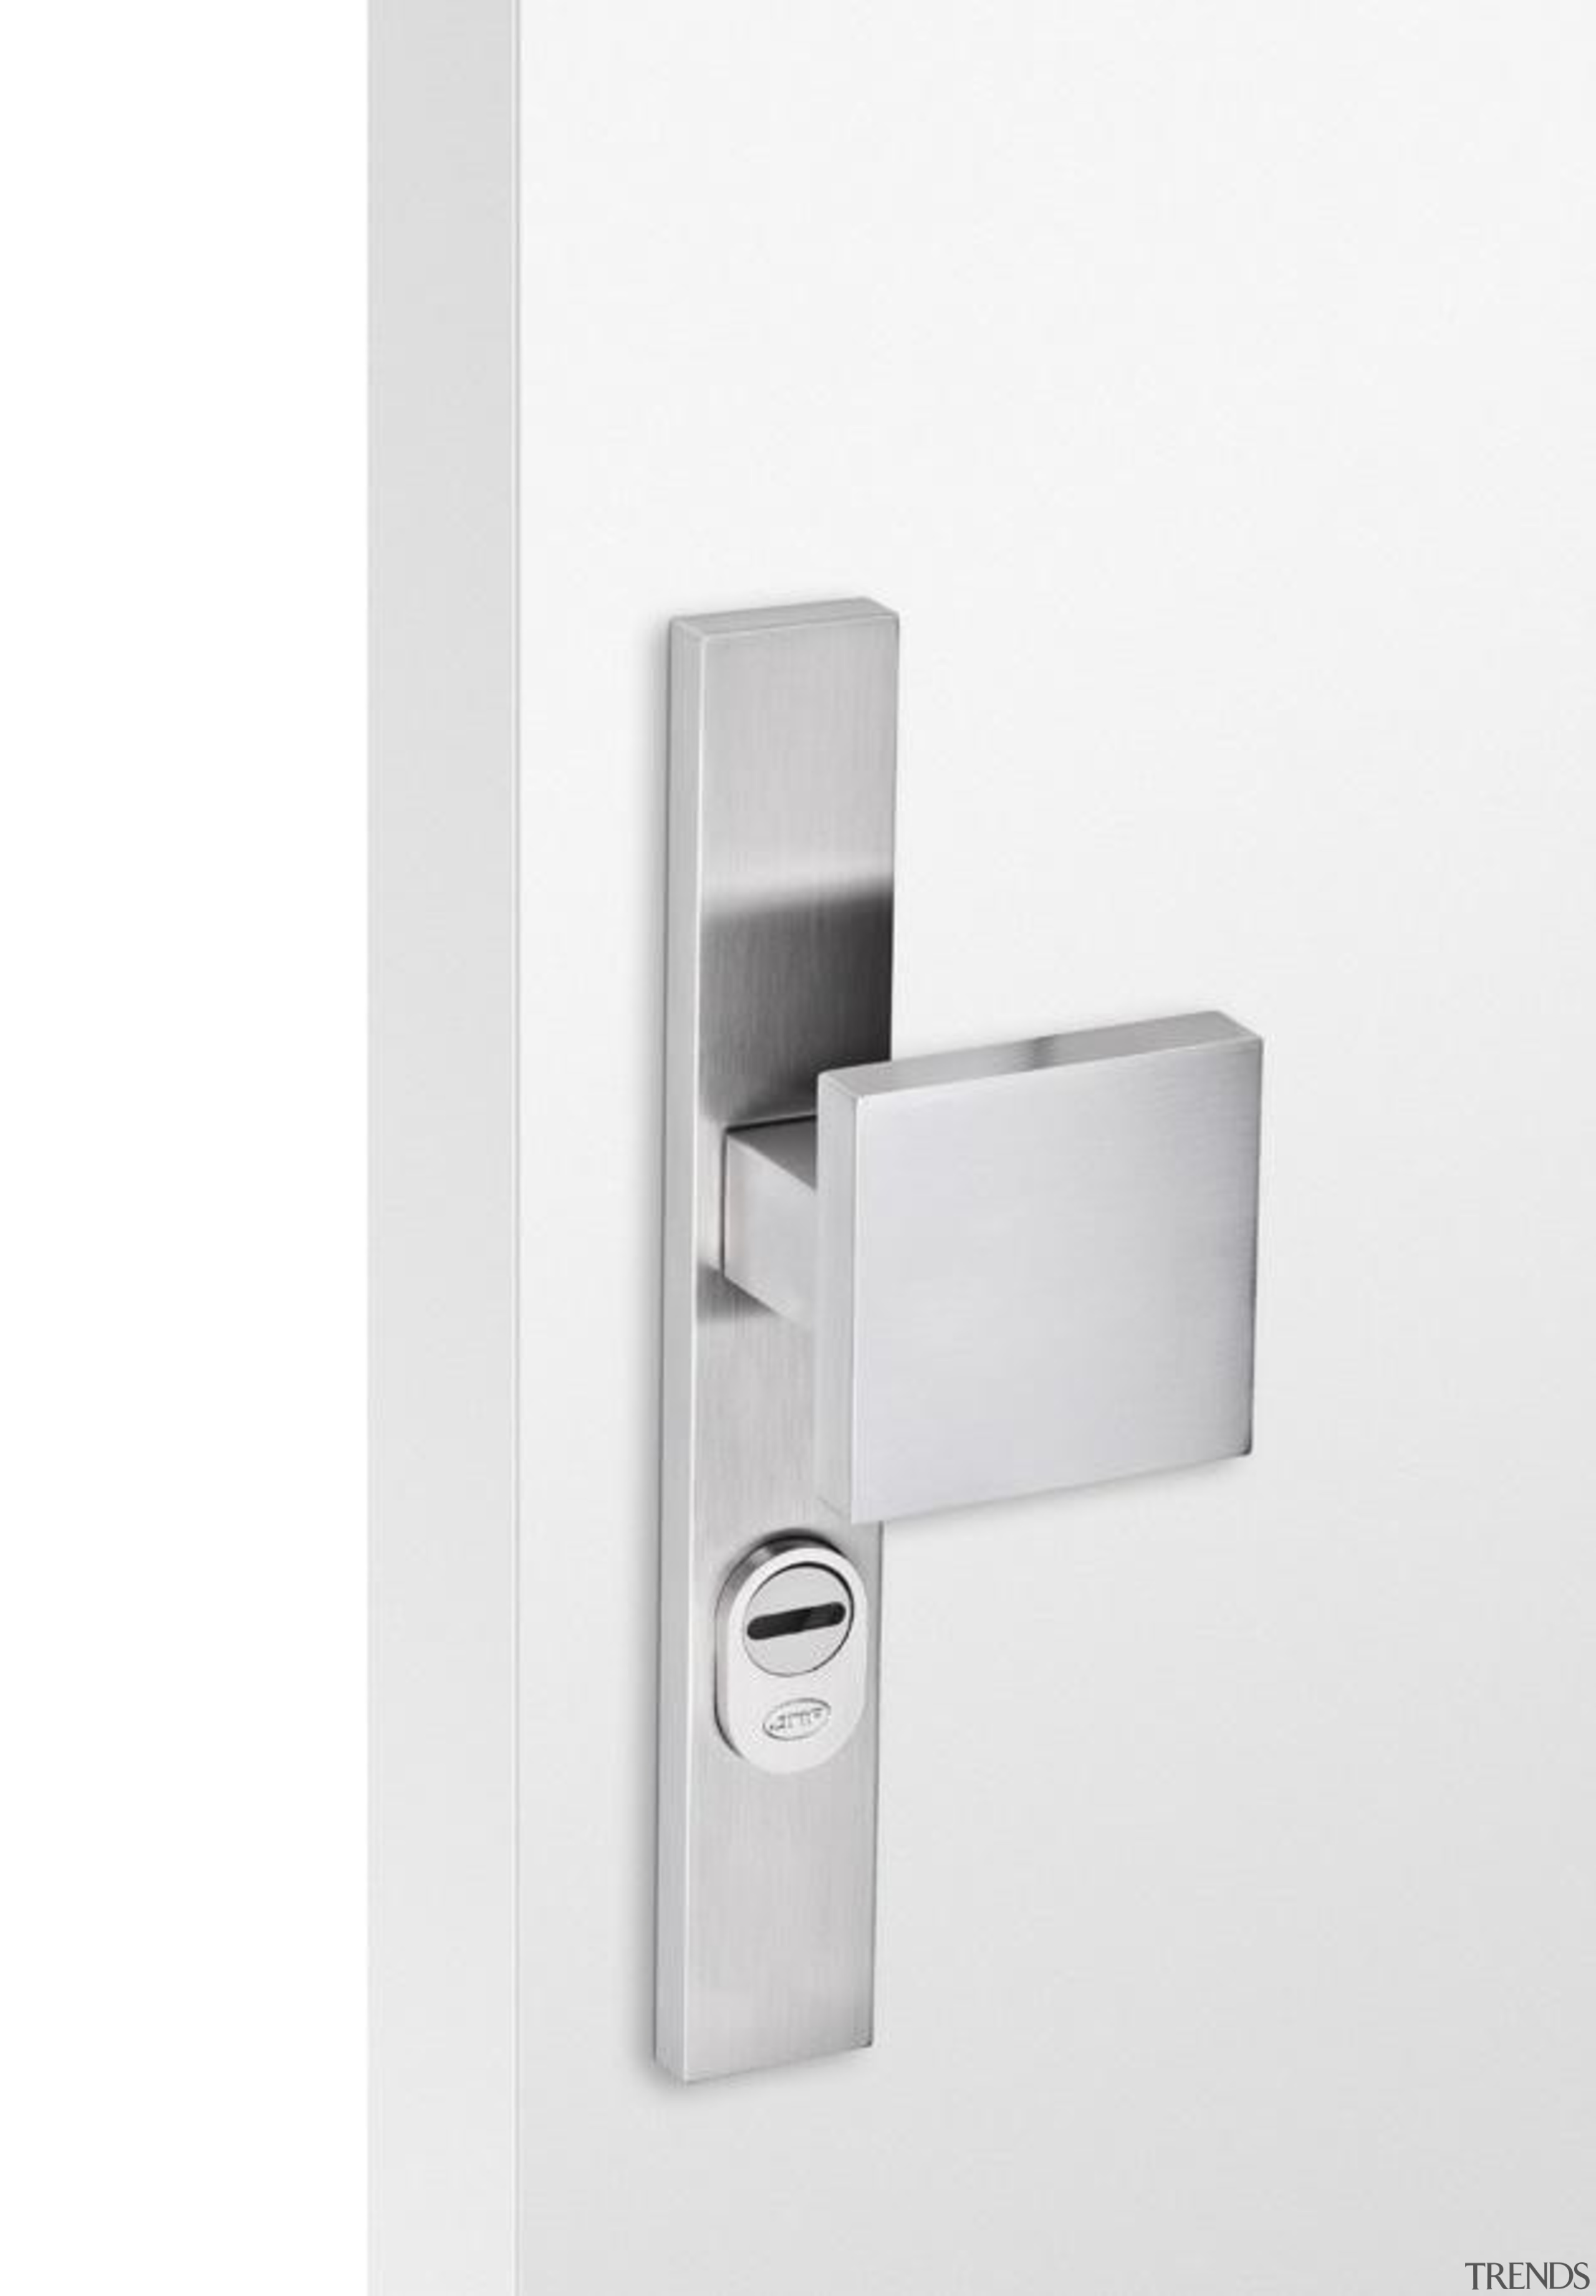 Mardeco International Ltd is an independent privately owned hardware, hardware accessory, lock, product, product design, white